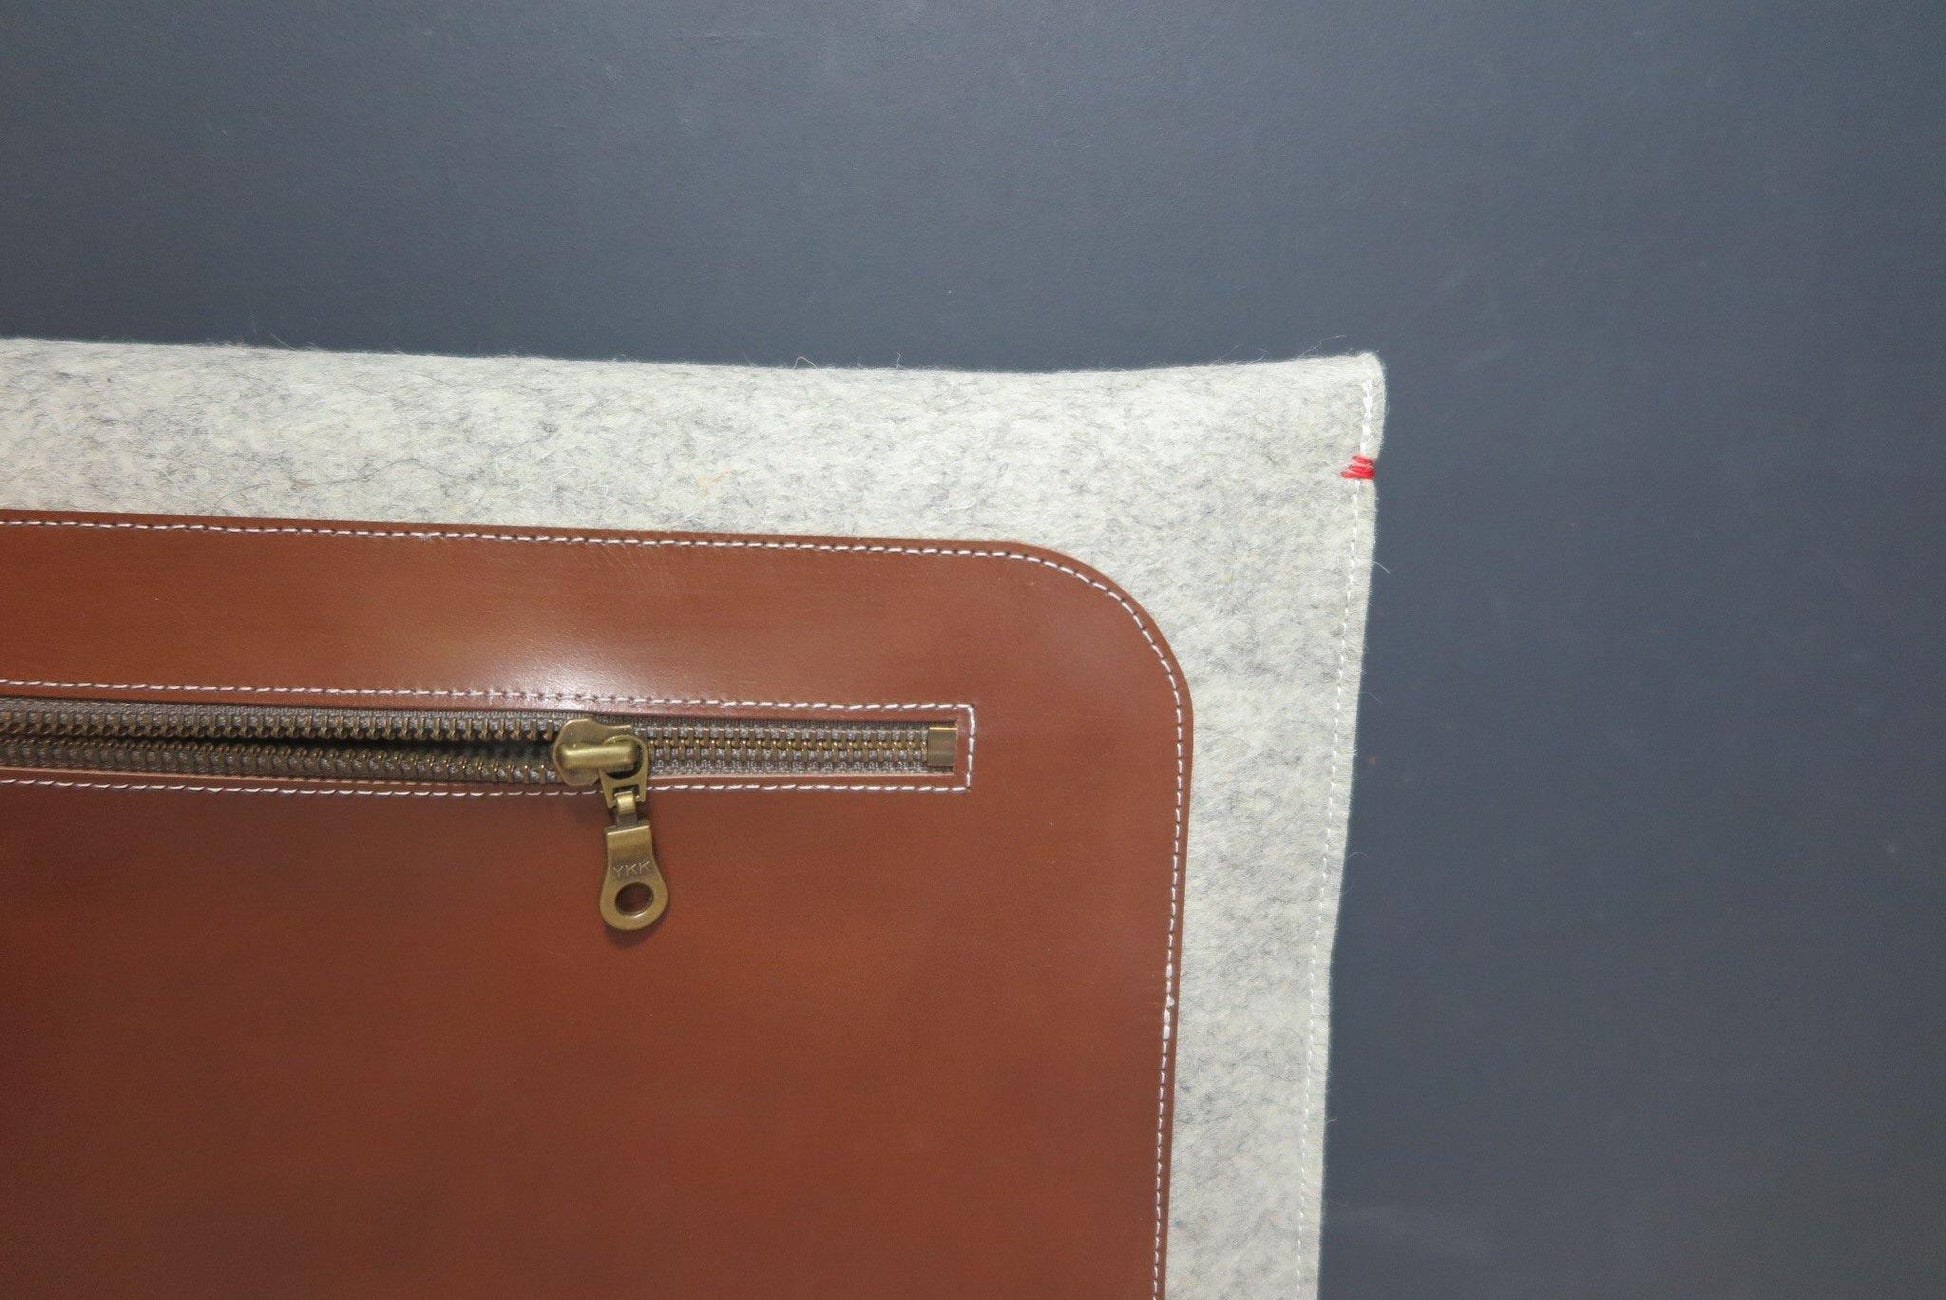 Premium leather and wool macbook case